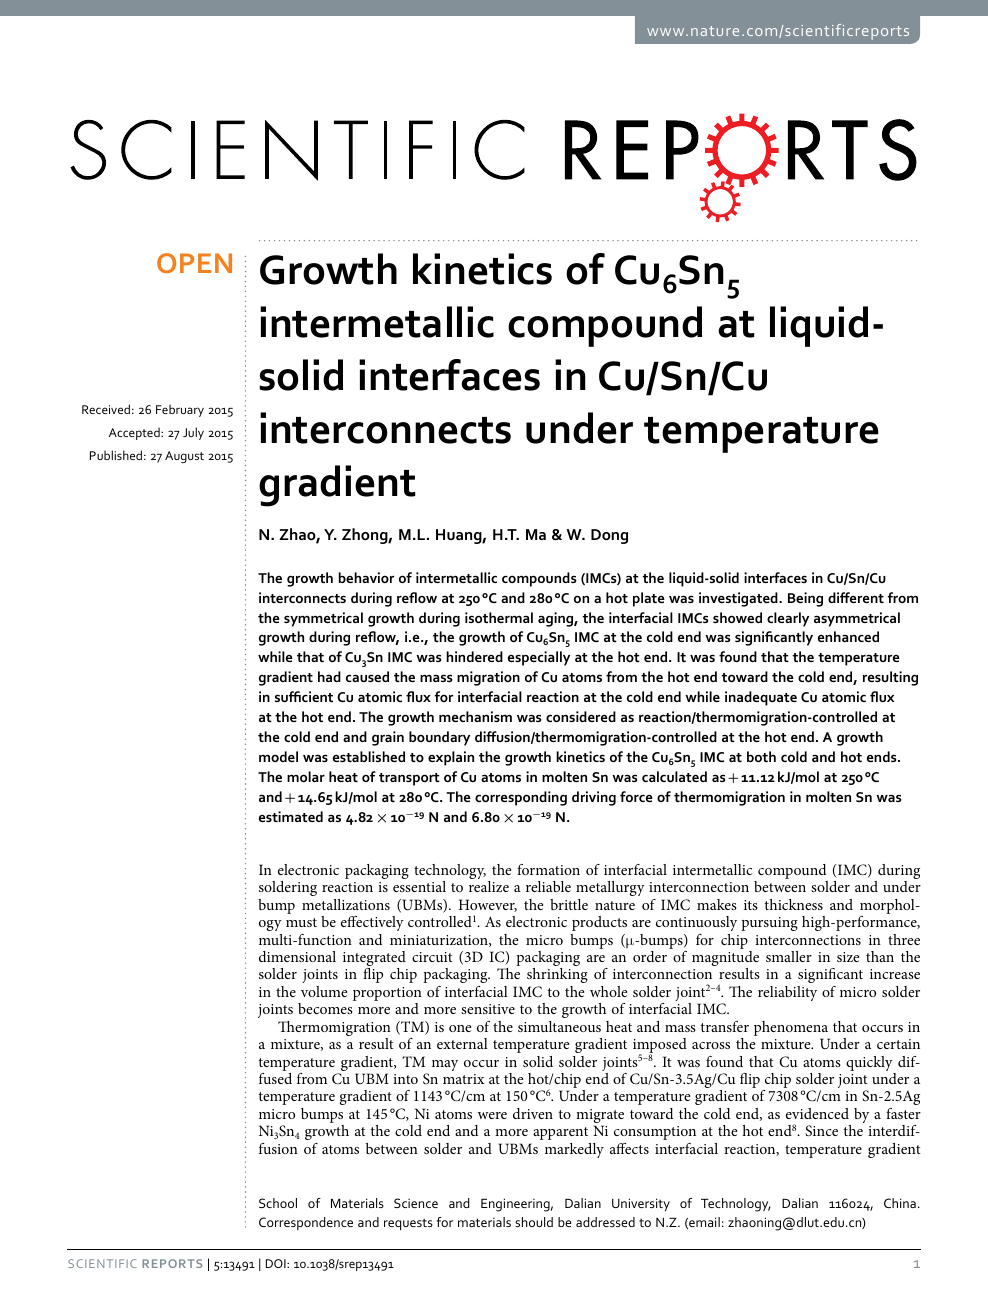 Growth Kinetics Of Cu6sn5 Intermetallic Compound At Liquid Solid Interfaces In Cu Sn Cu Interconnects Under Temperature Gradient Topic Of Research Paper In Materials Engineering Download Scholarly Article Pdf And Read For Free On